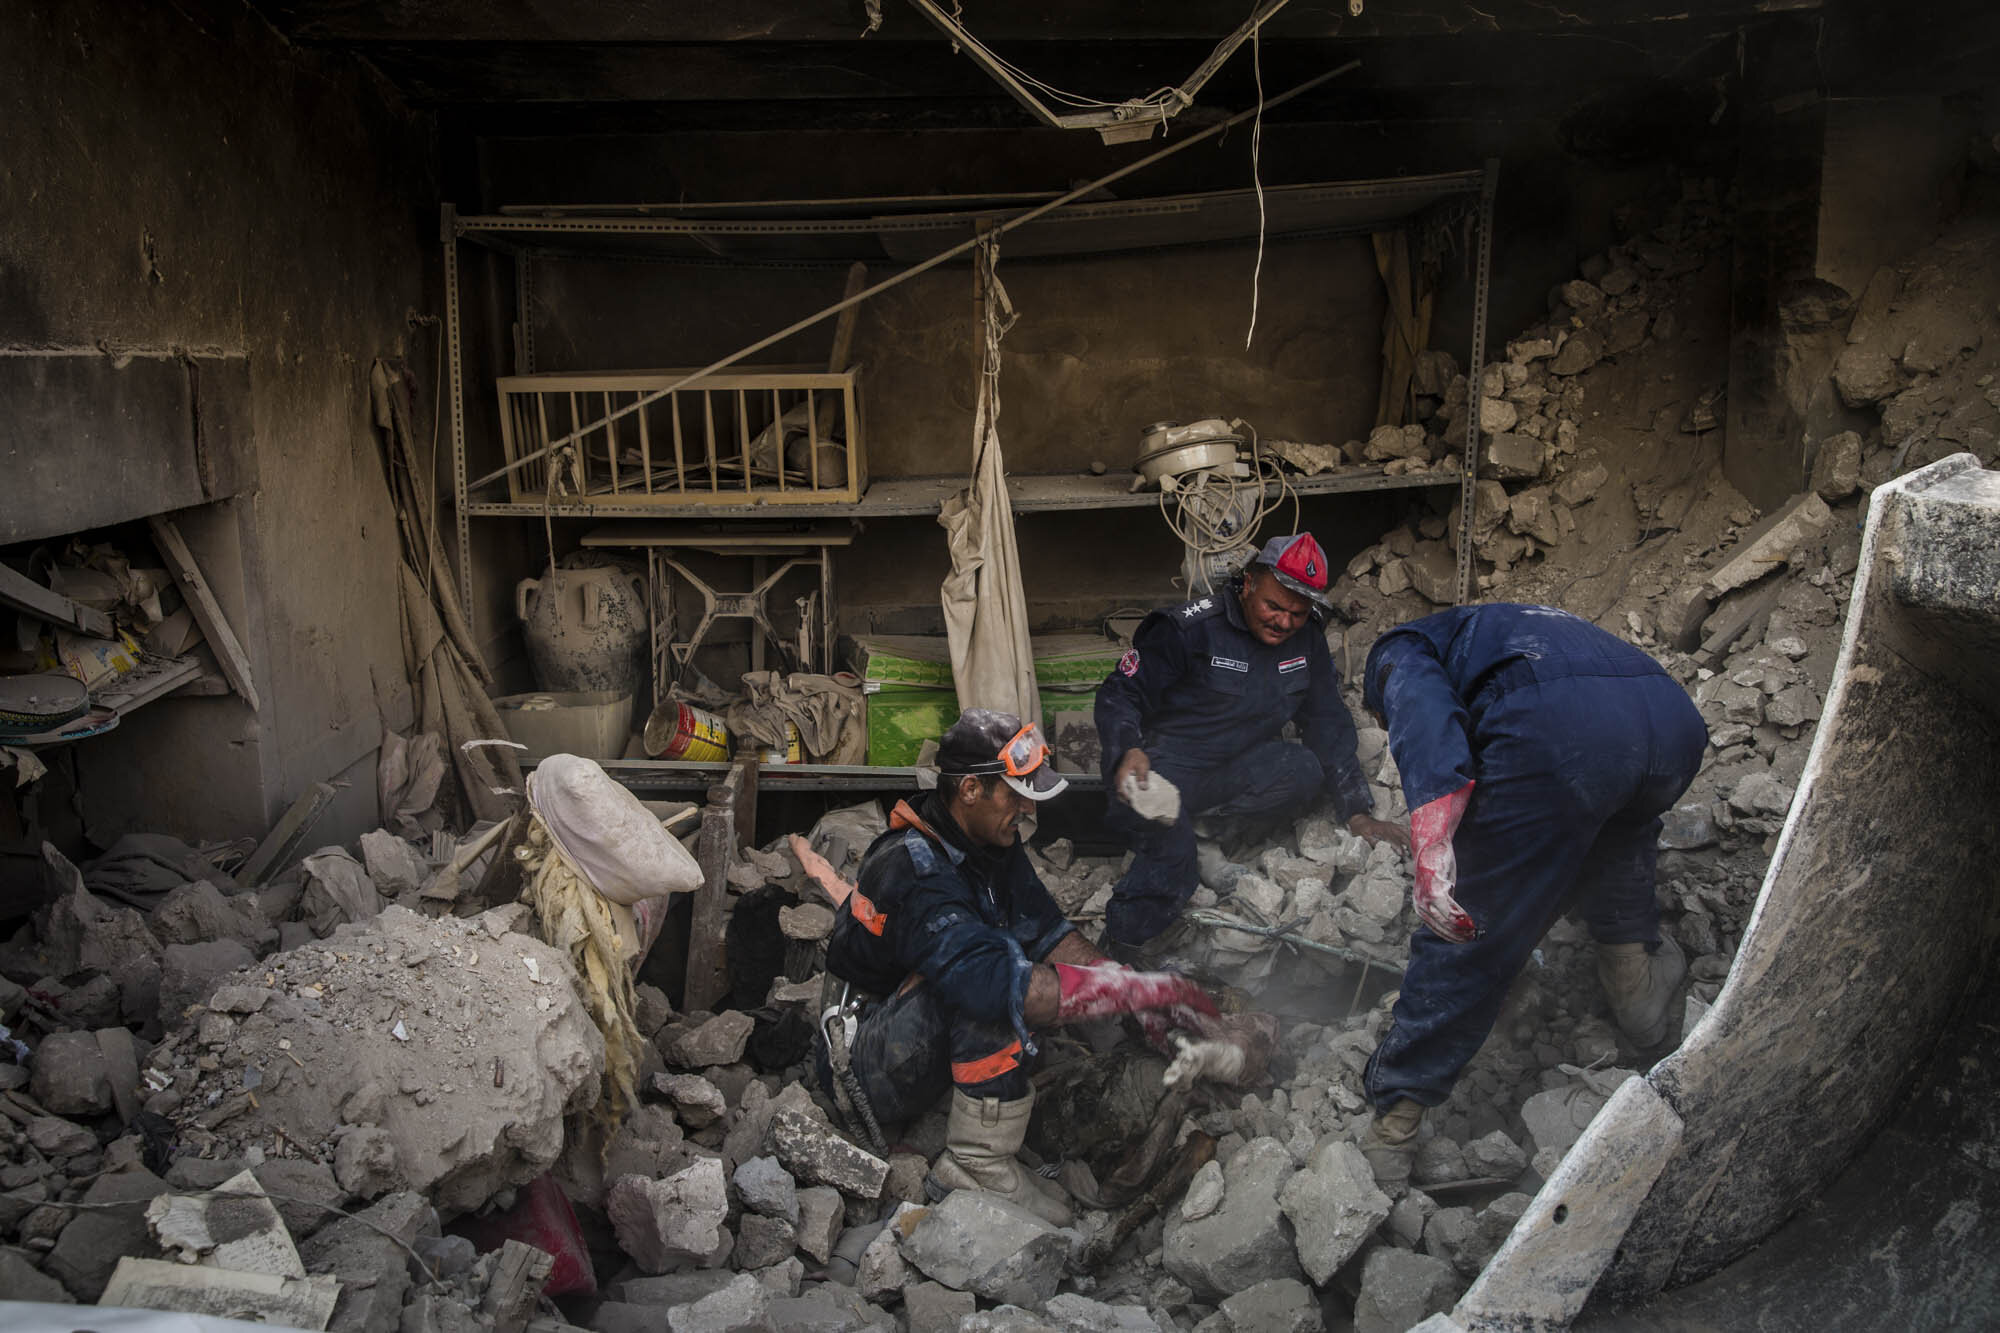  Iraqi civil defense workers recovered the body of Sondus Mazaal’s mother who was killed by an airstrike in Mosul’s Old City in June. Iraq - September 2017 